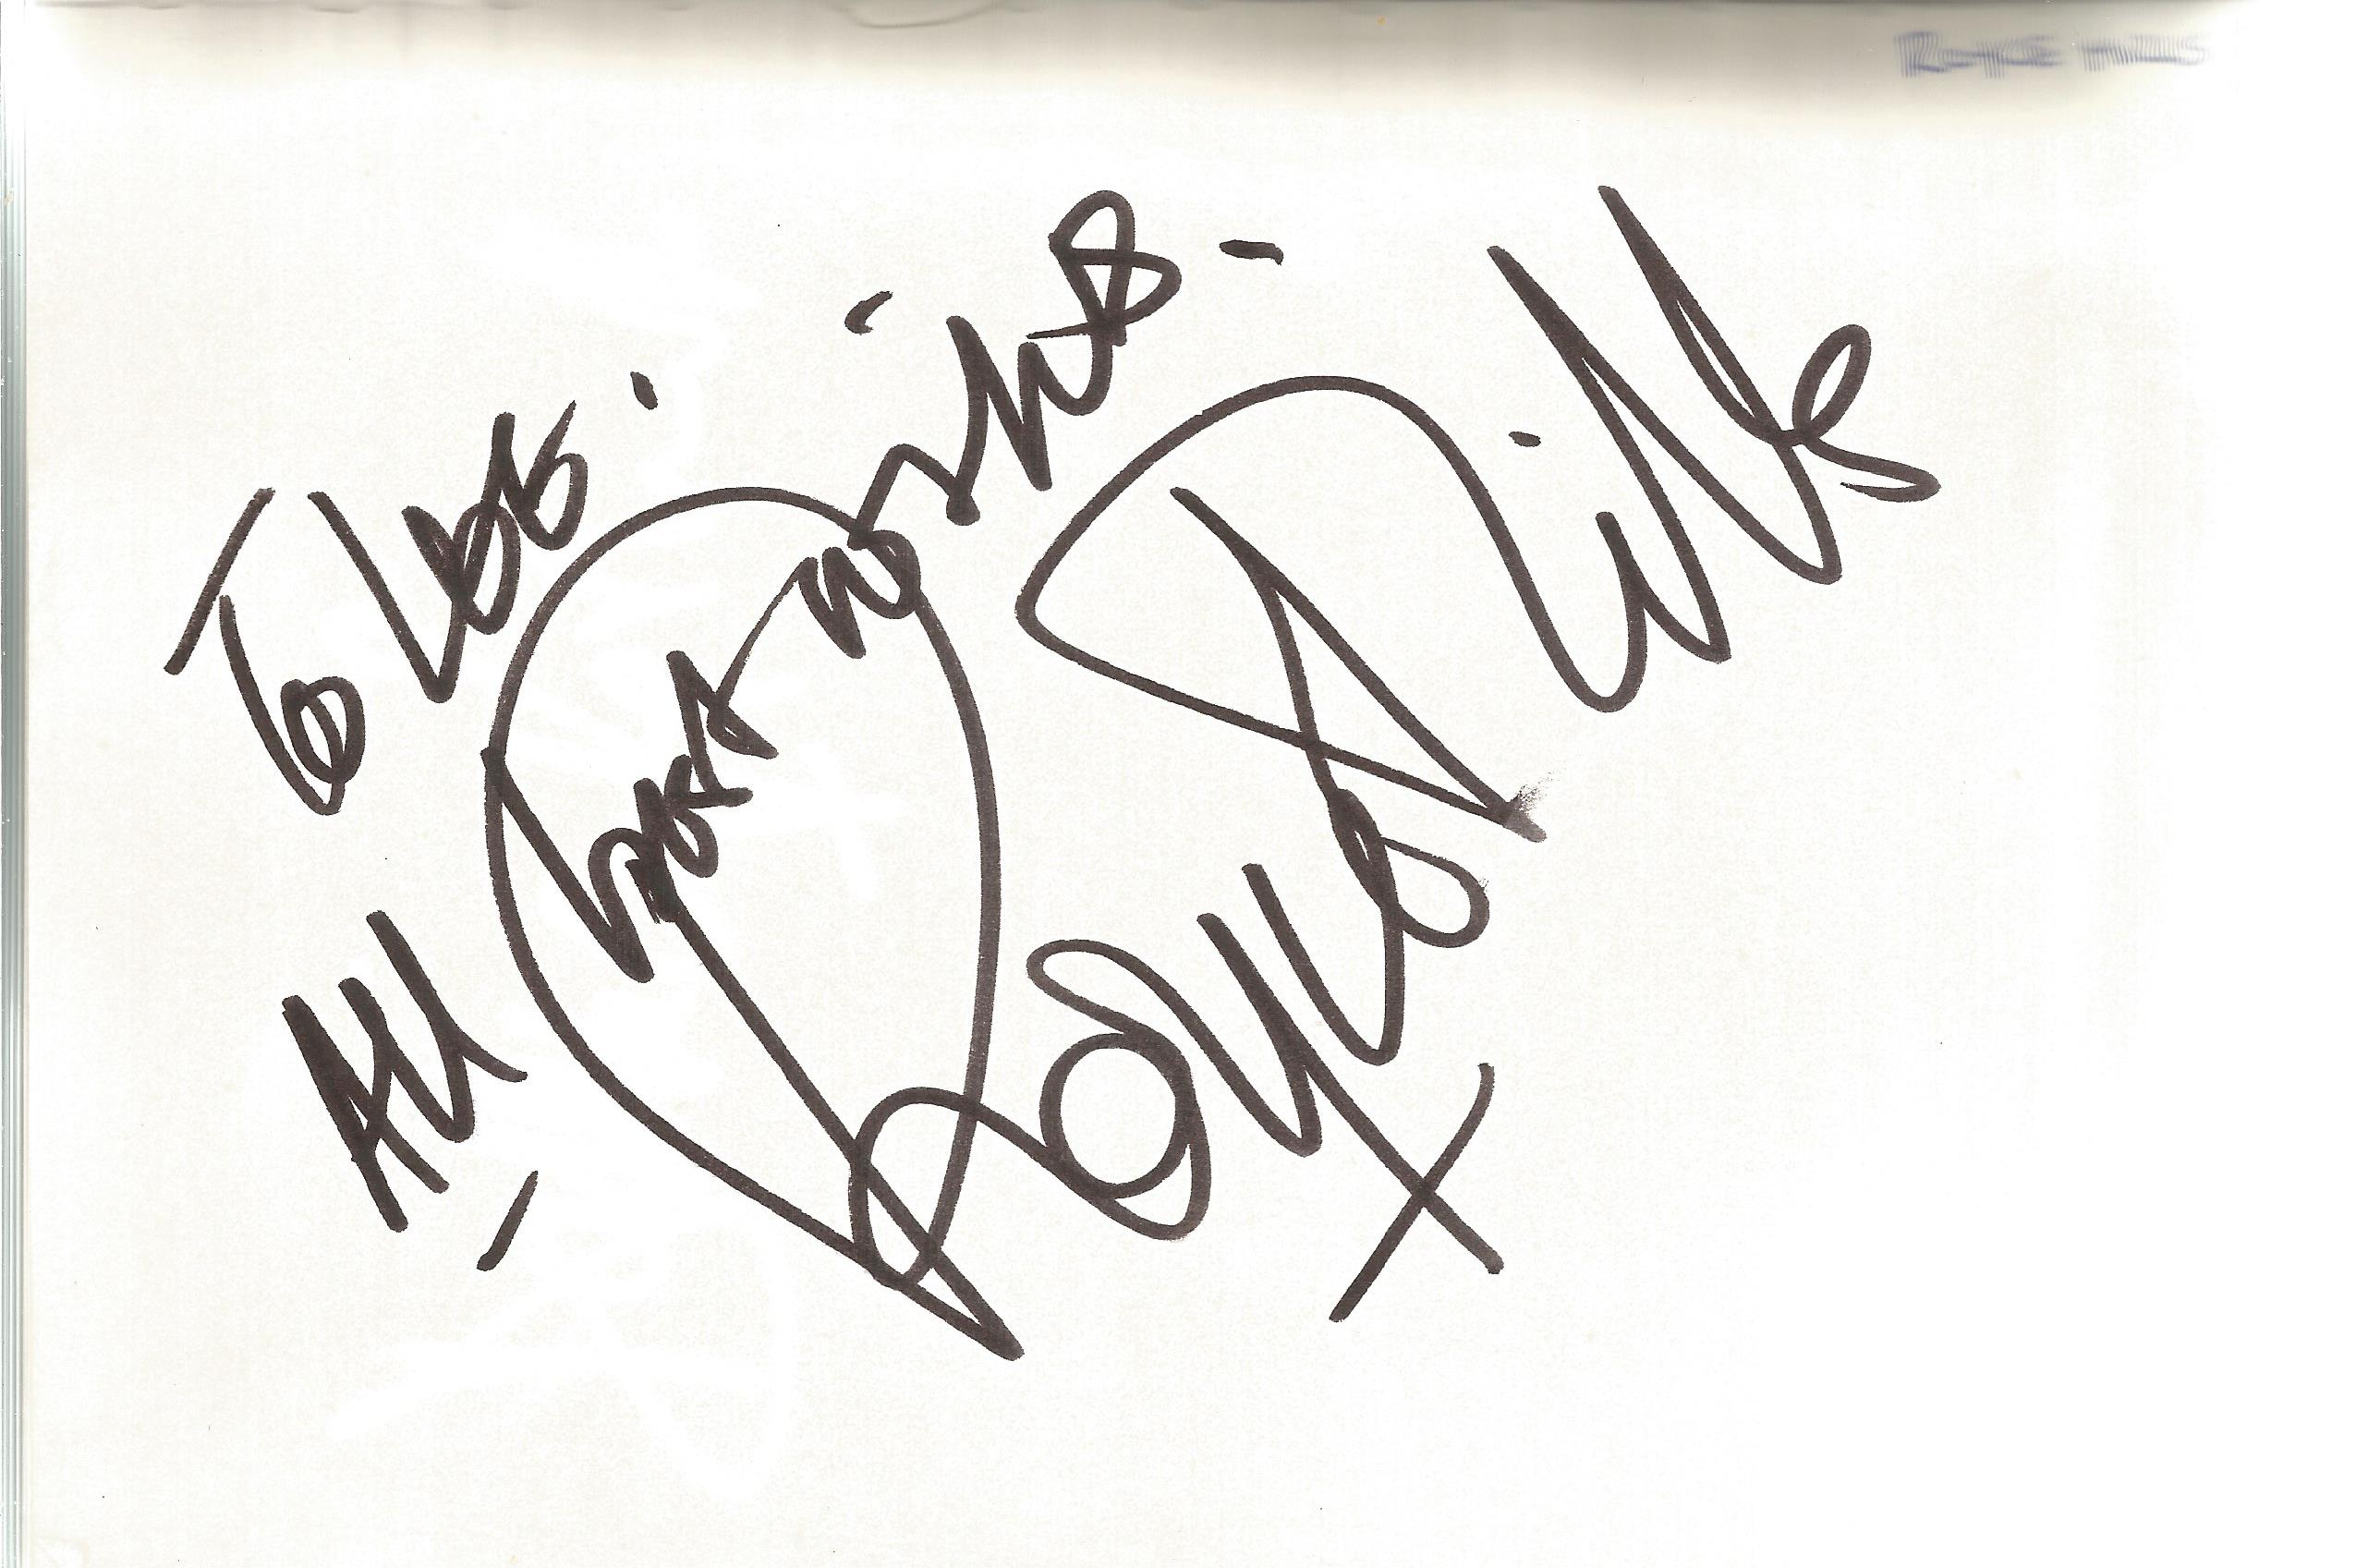 Autograph book with 50+ signatures on 8x6 pages. Some of signatures included are Tom Conti, Royce - Image 4 of 6